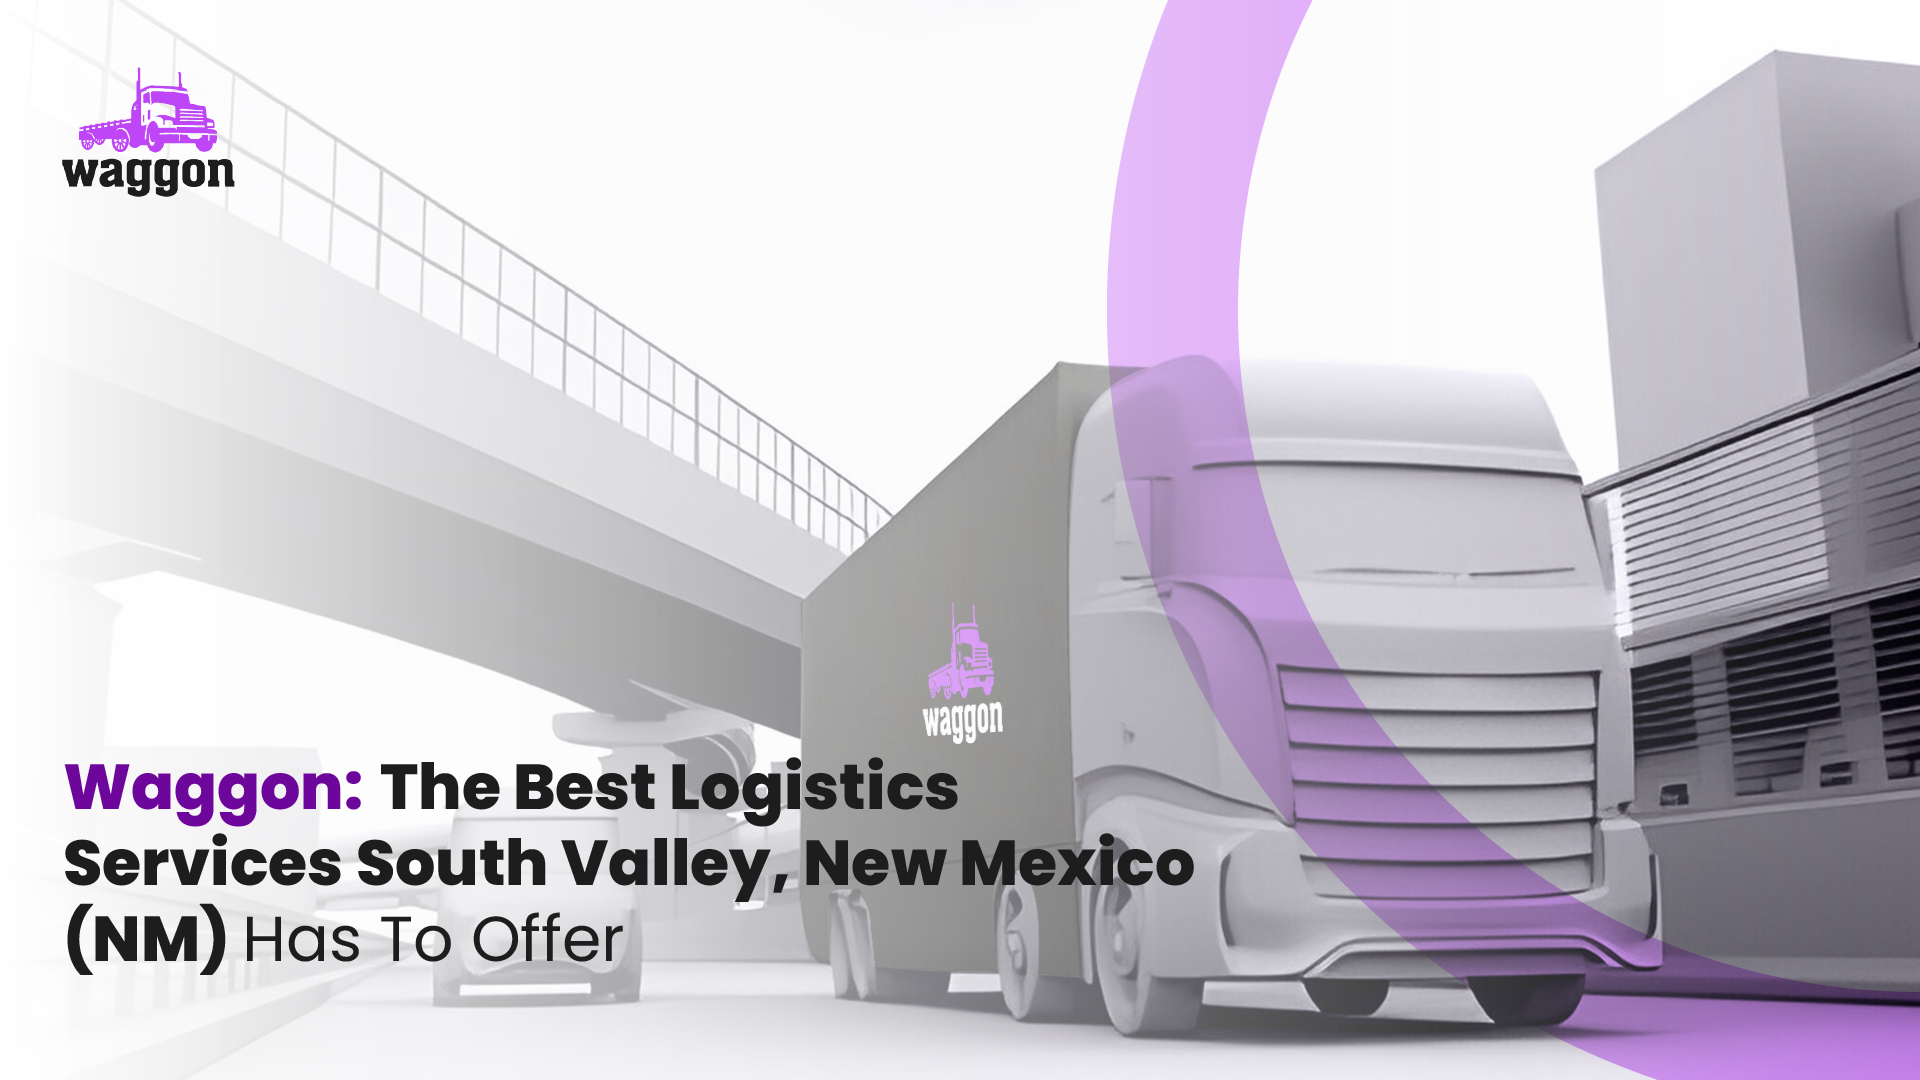 South Valley Logistics Services